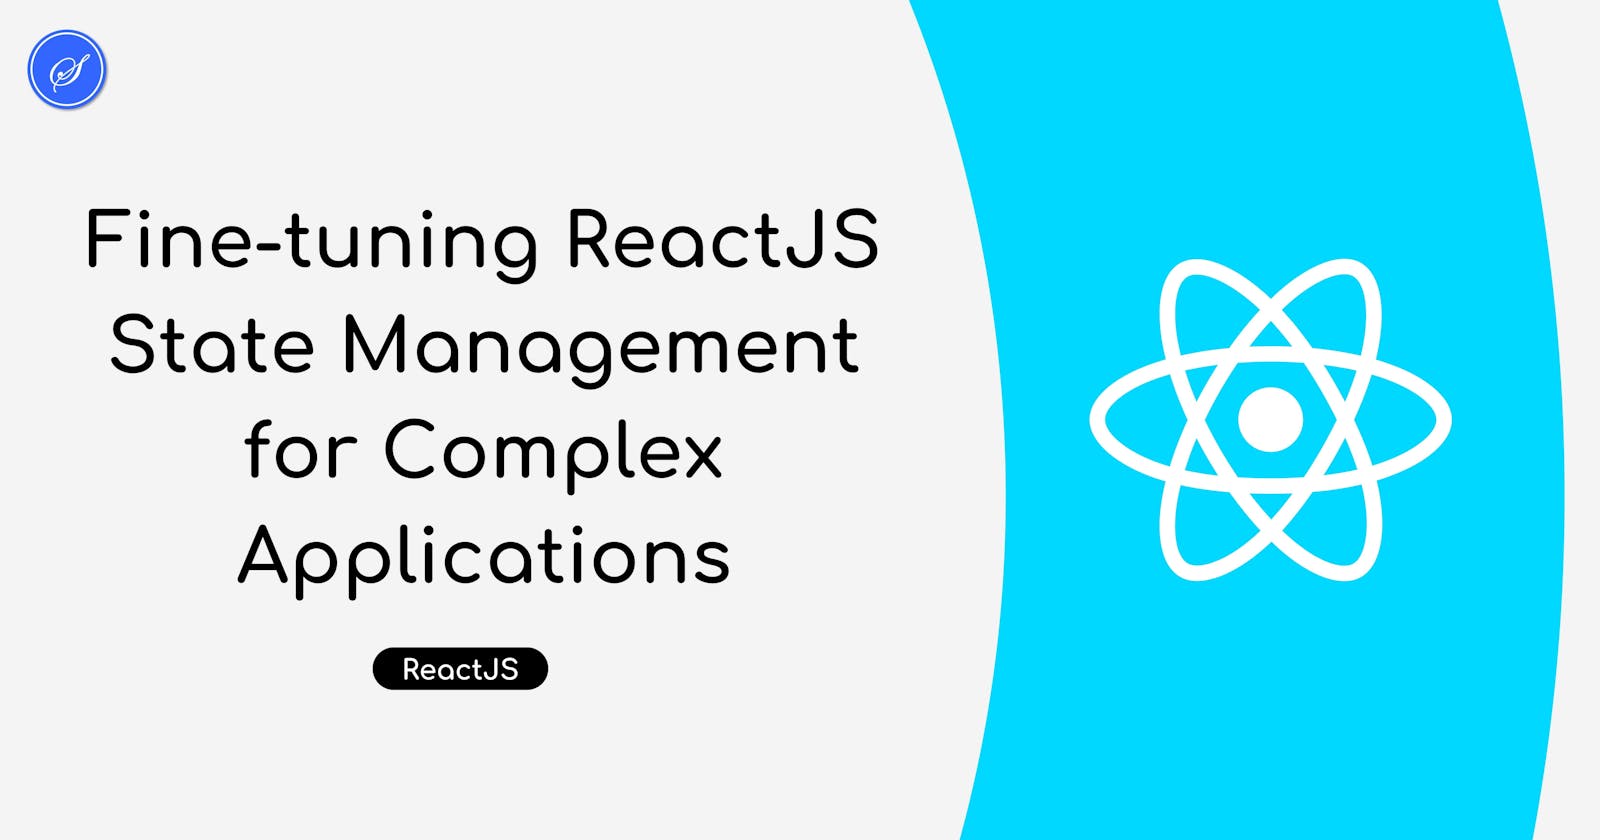 Fine-tuning ReactJS State Management for Complex Applications